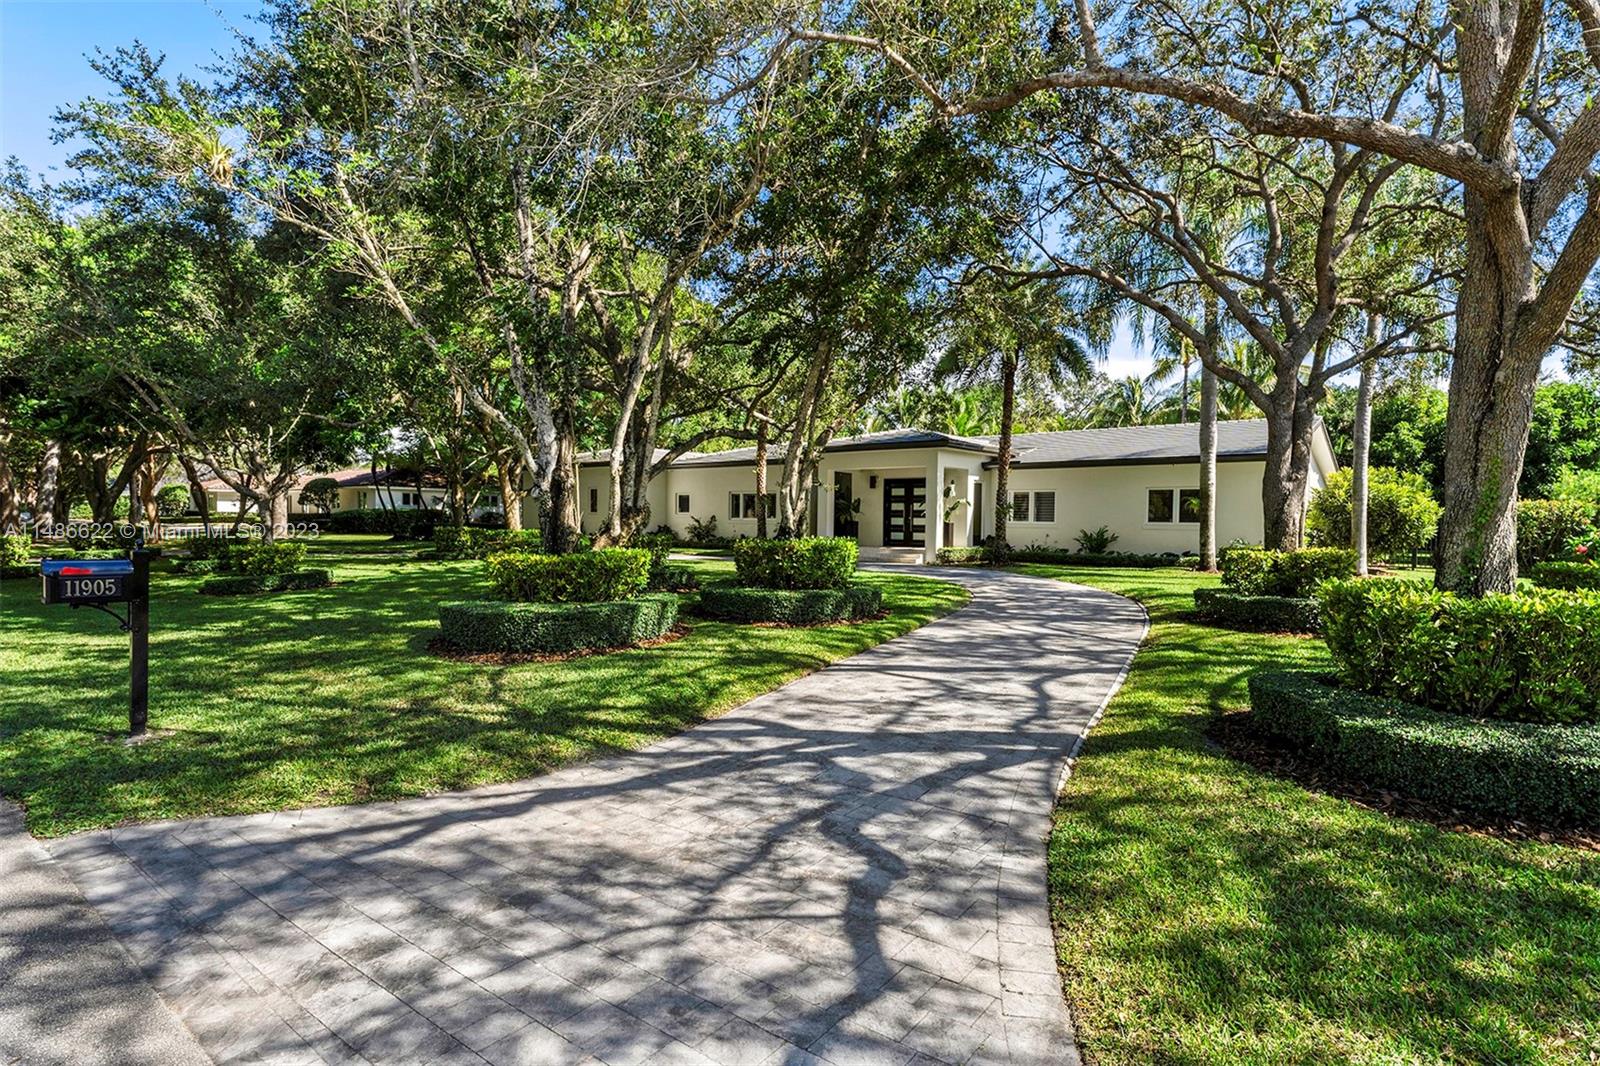 11905 Sw 66th Ave, Pinecrest, Miami-Dade County, Florida - 5 Bedrooms  
5 Bathrooms - 